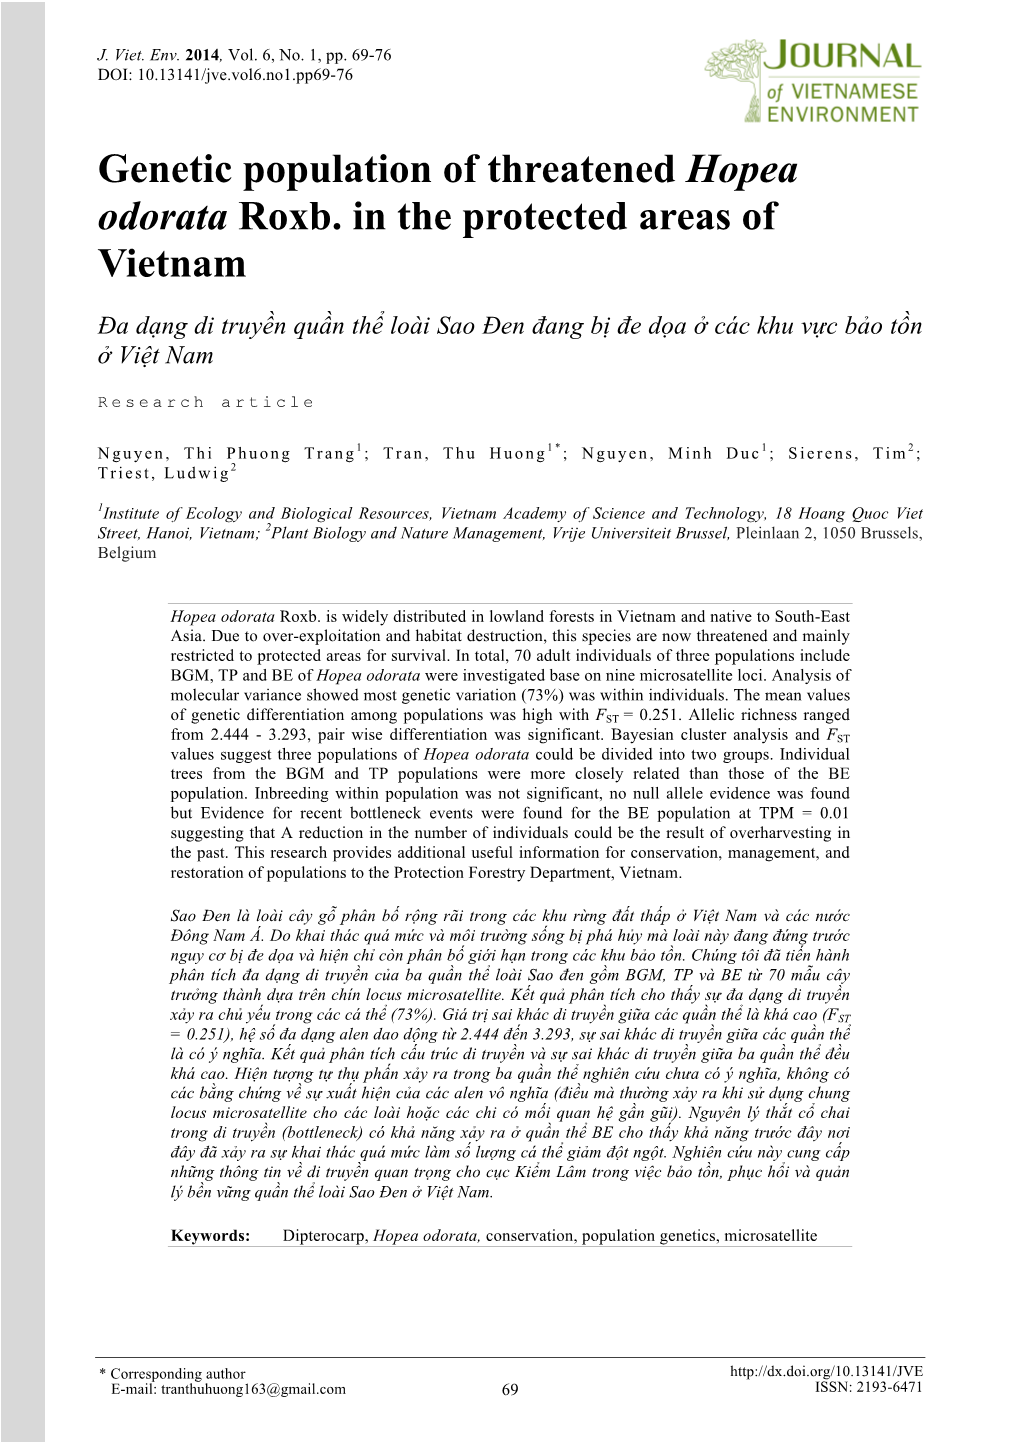 Genetic Population of Threatened Hopea Odorata Roxb. in the Protected Areas of Vietnam